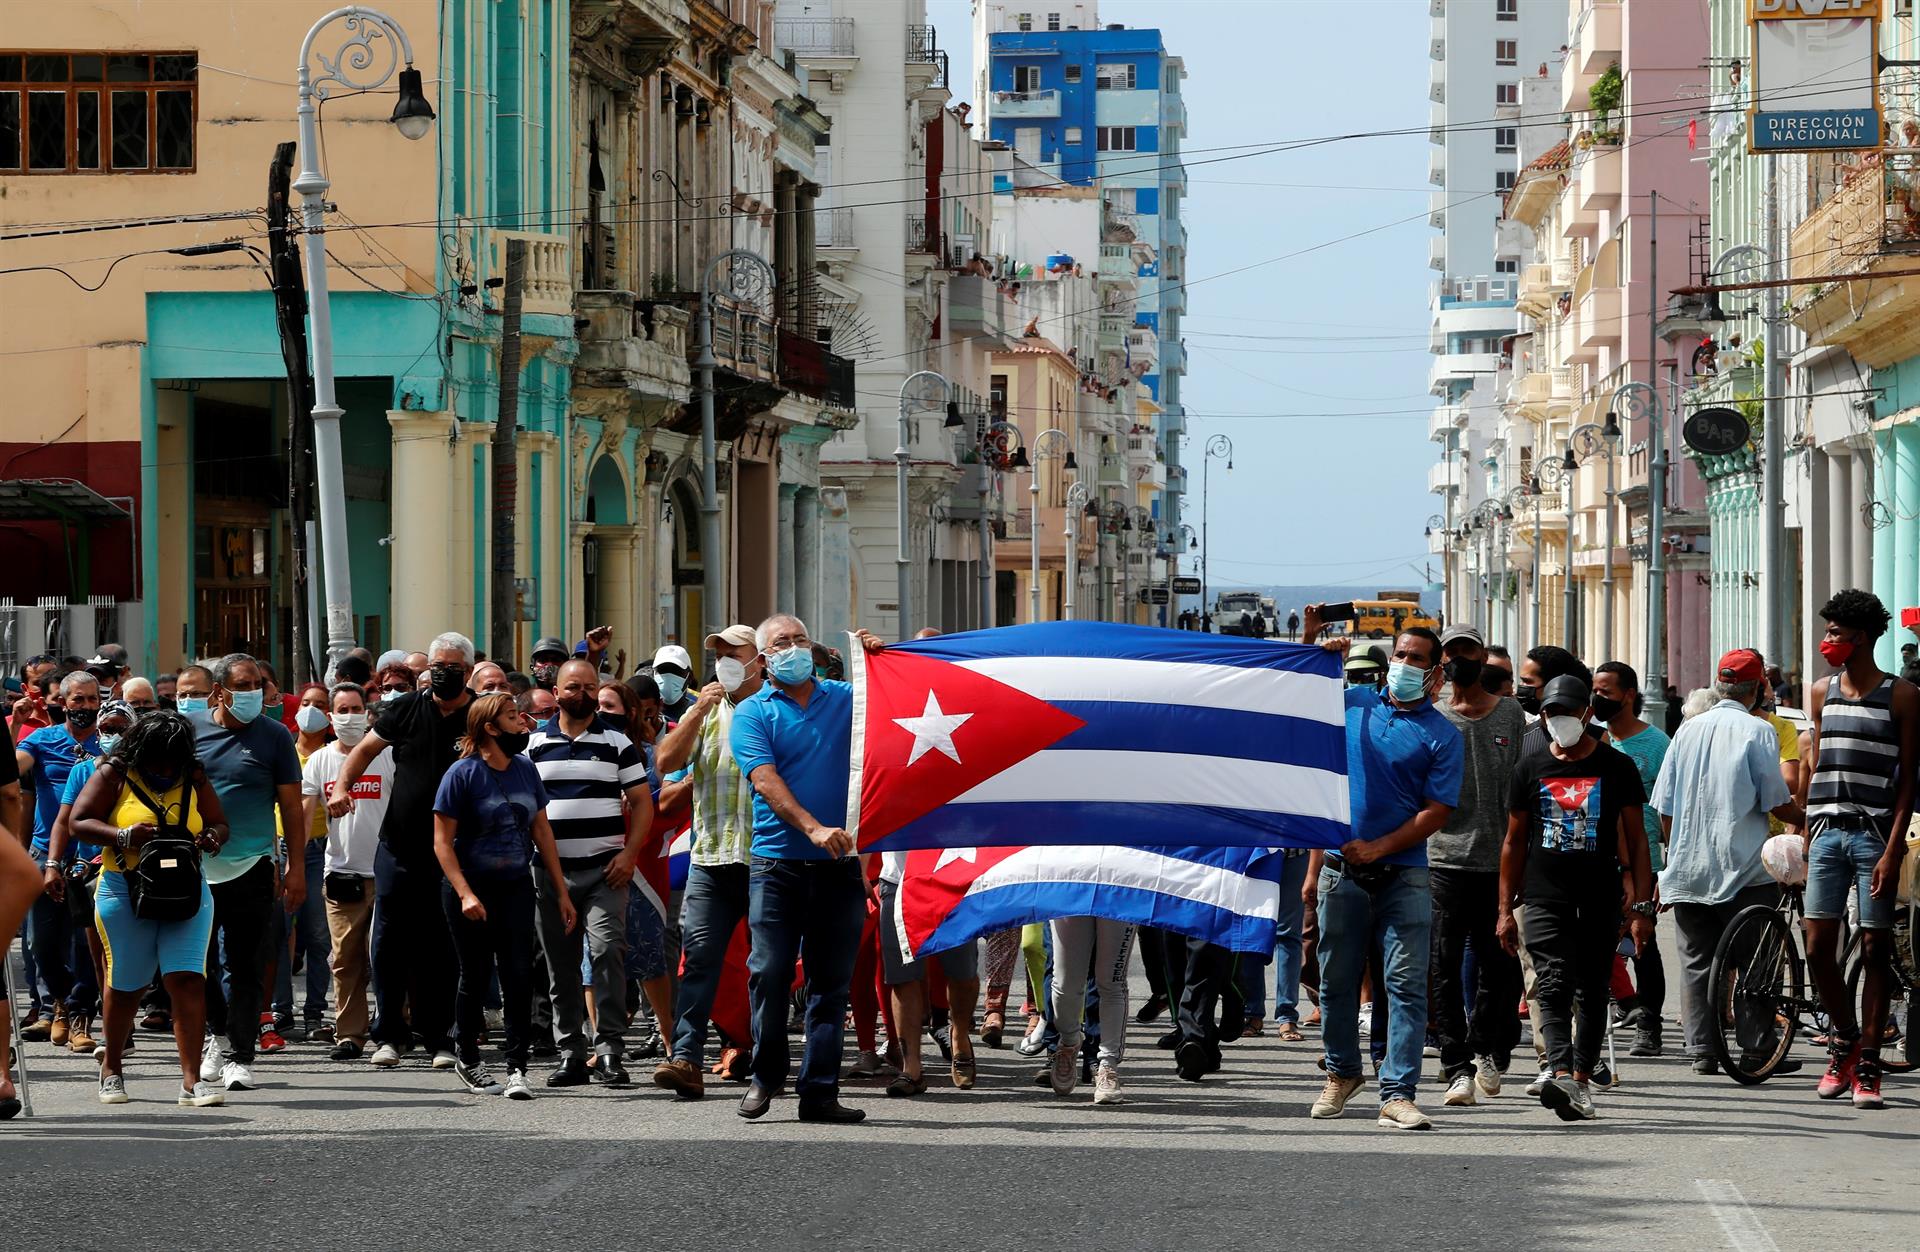 The Way to Evade Price Controls – Translating Cuba